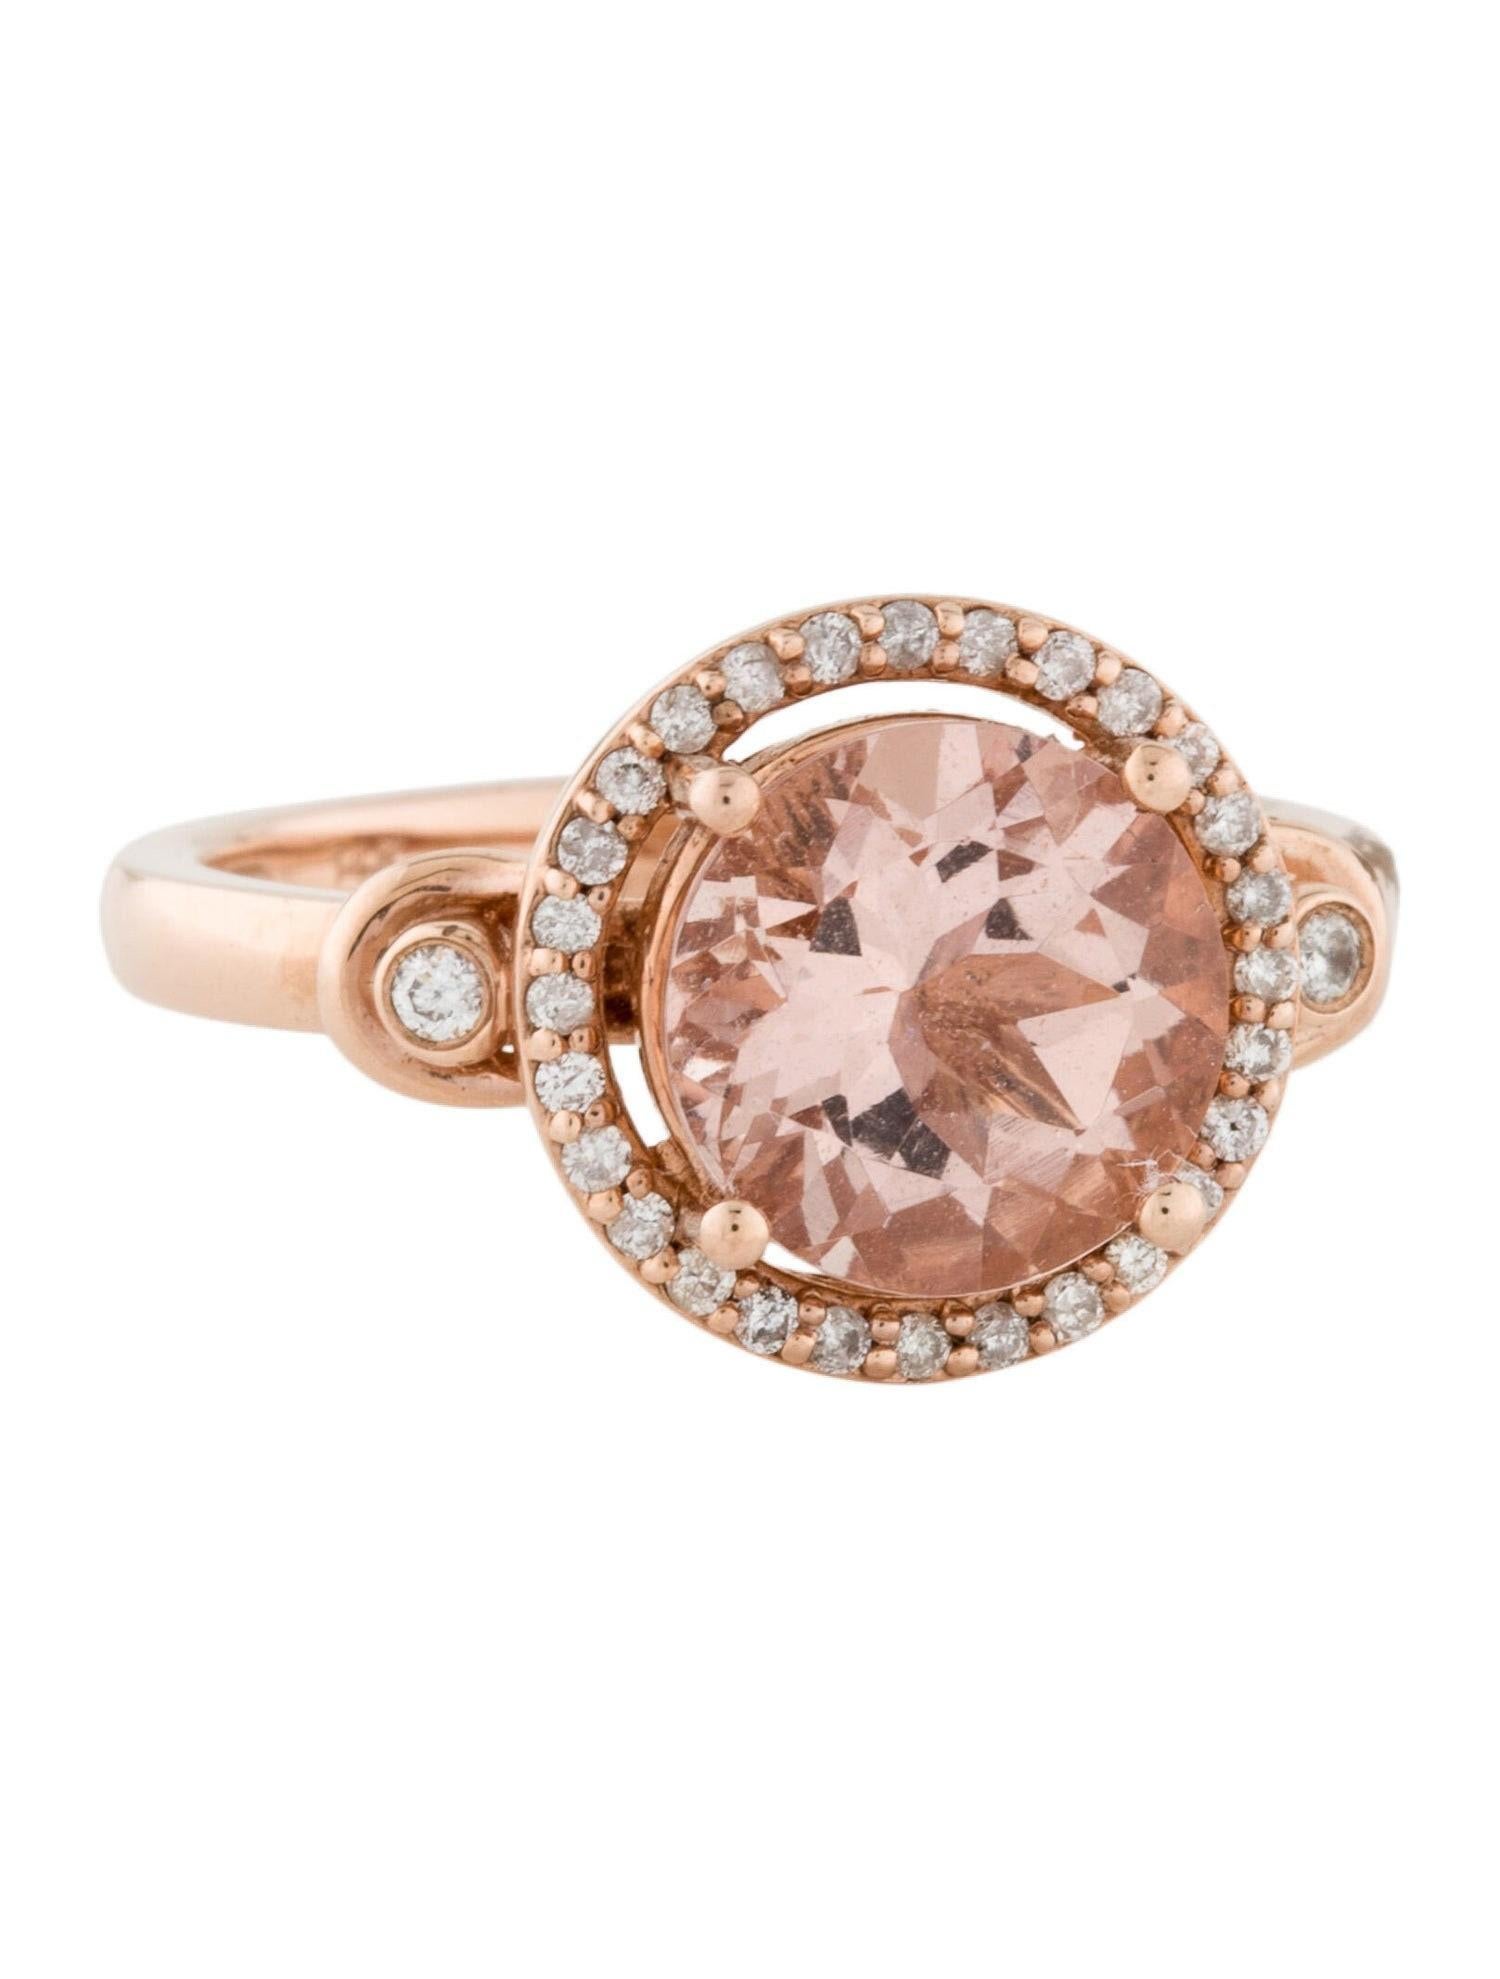 This stunning natural morganite and diamond-encrusted ring is set in solid 14K rose gold. The natural round cut 2.55 carat morganite has an excellent peachy pink color and is surrounded by a halo of round cut white diamonds. The ring is stamped 14K